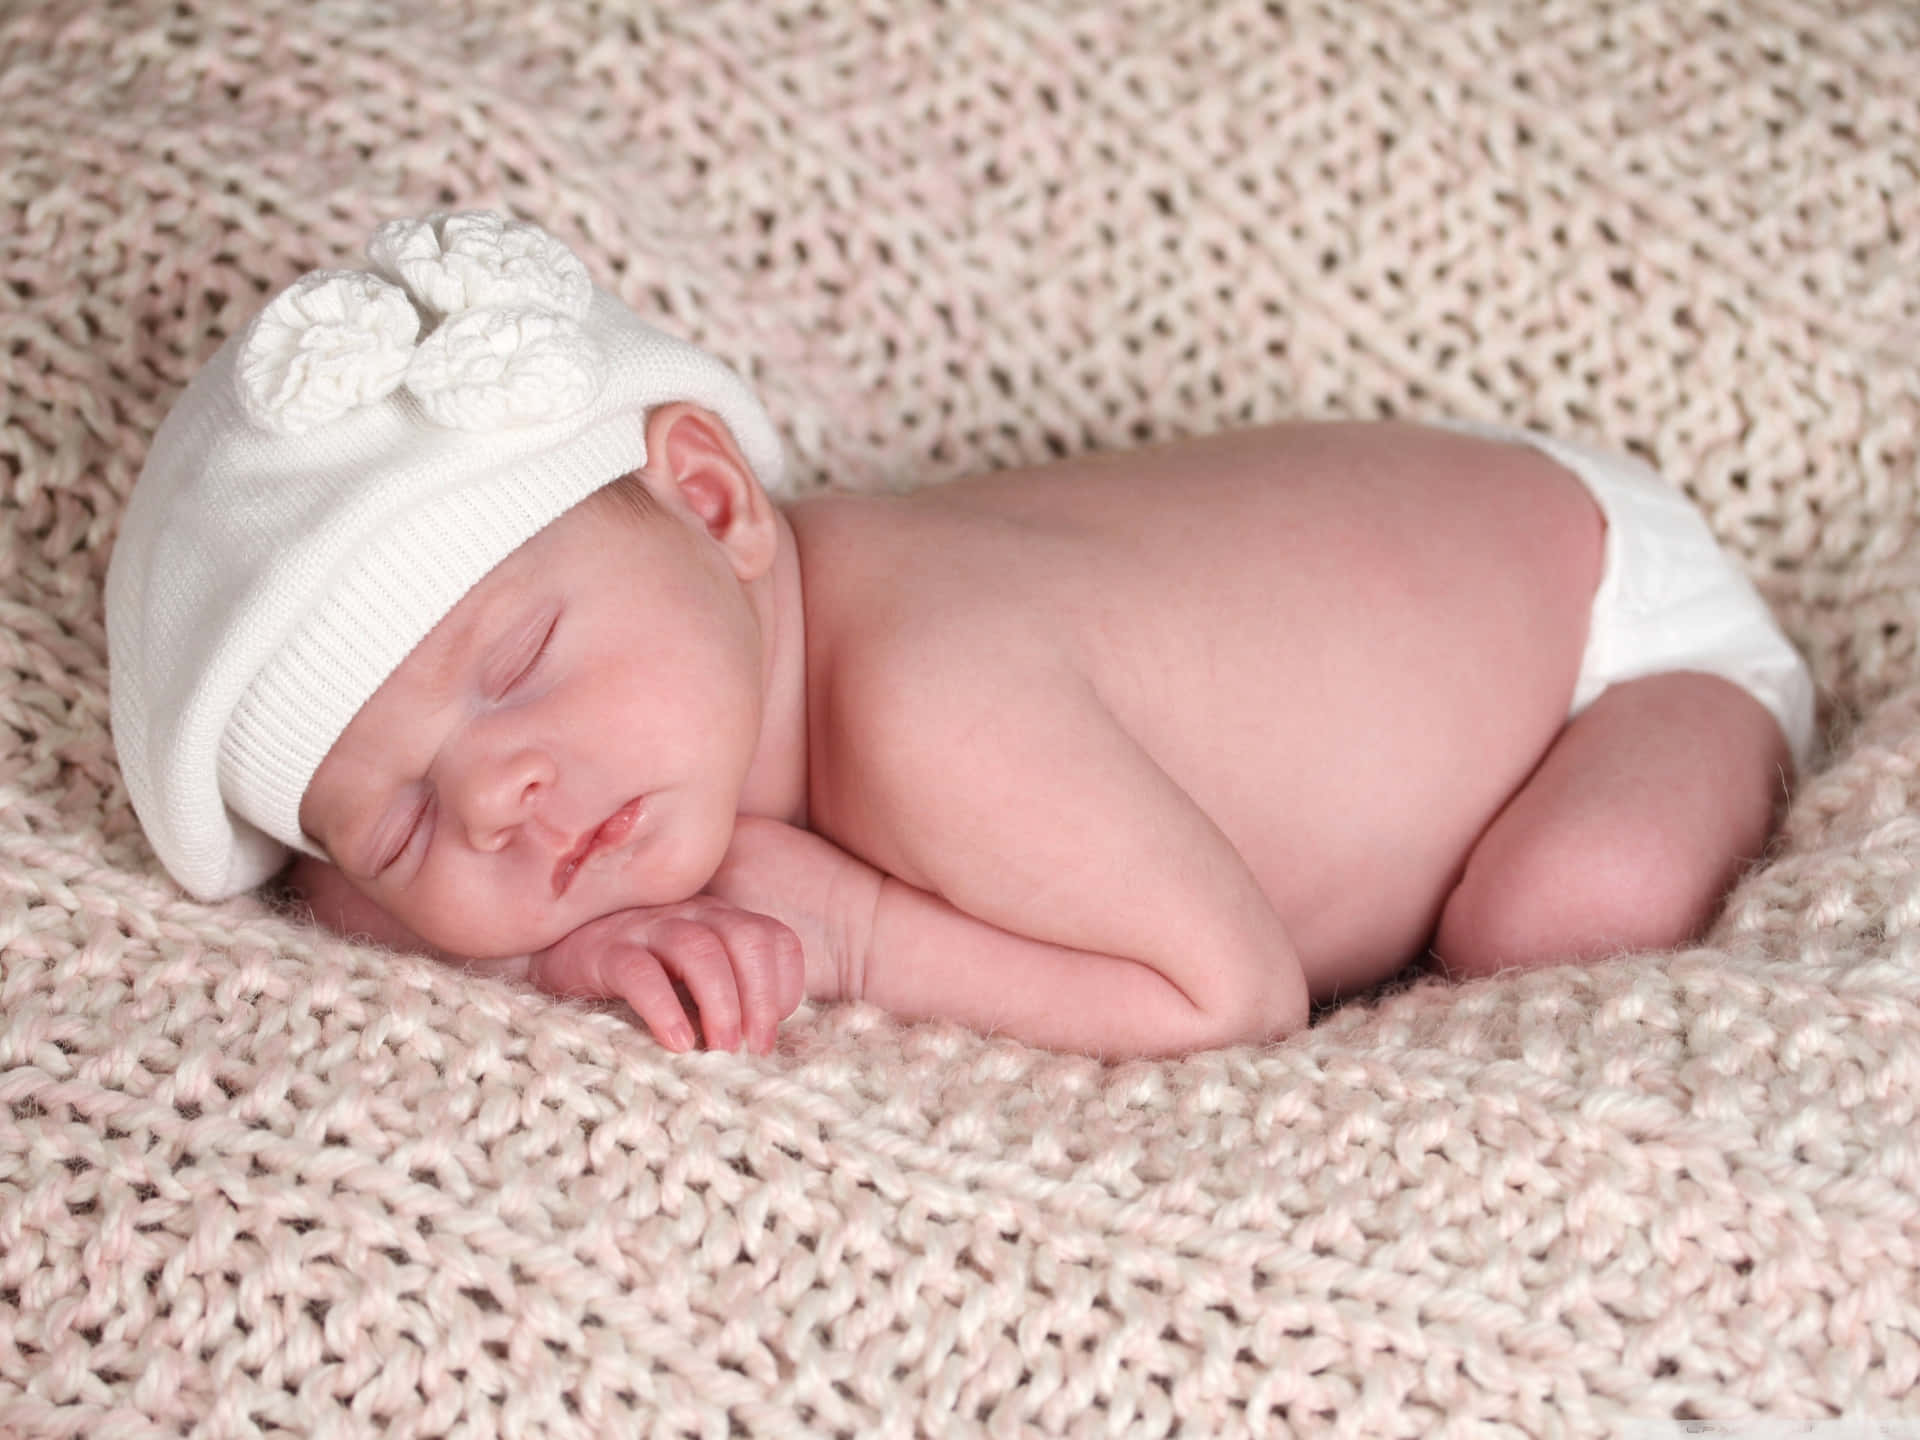 Sleeping New Born Baby With A White Cap Wallpaper